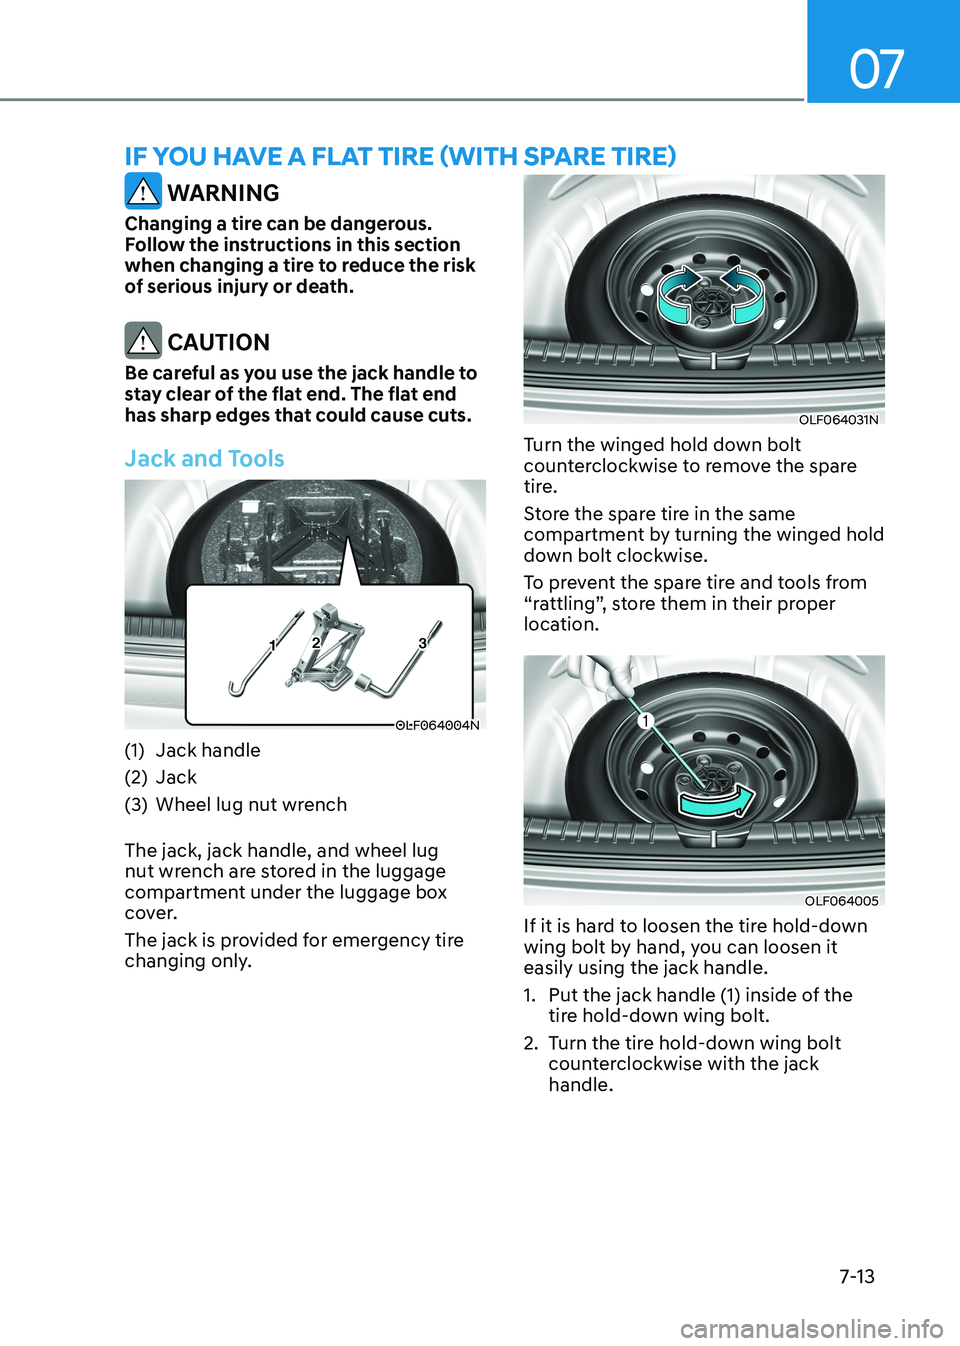 HYUNDAI SONATA 2023  Owners Manual 07
7-13
if you Have a flaT Tire (WiTH sPare Tire)
 WARNING
Changing a tire can be dangerous.  
Follow the instructions in this section 
when changing a tire to reduce the risk 
of serious injury or de